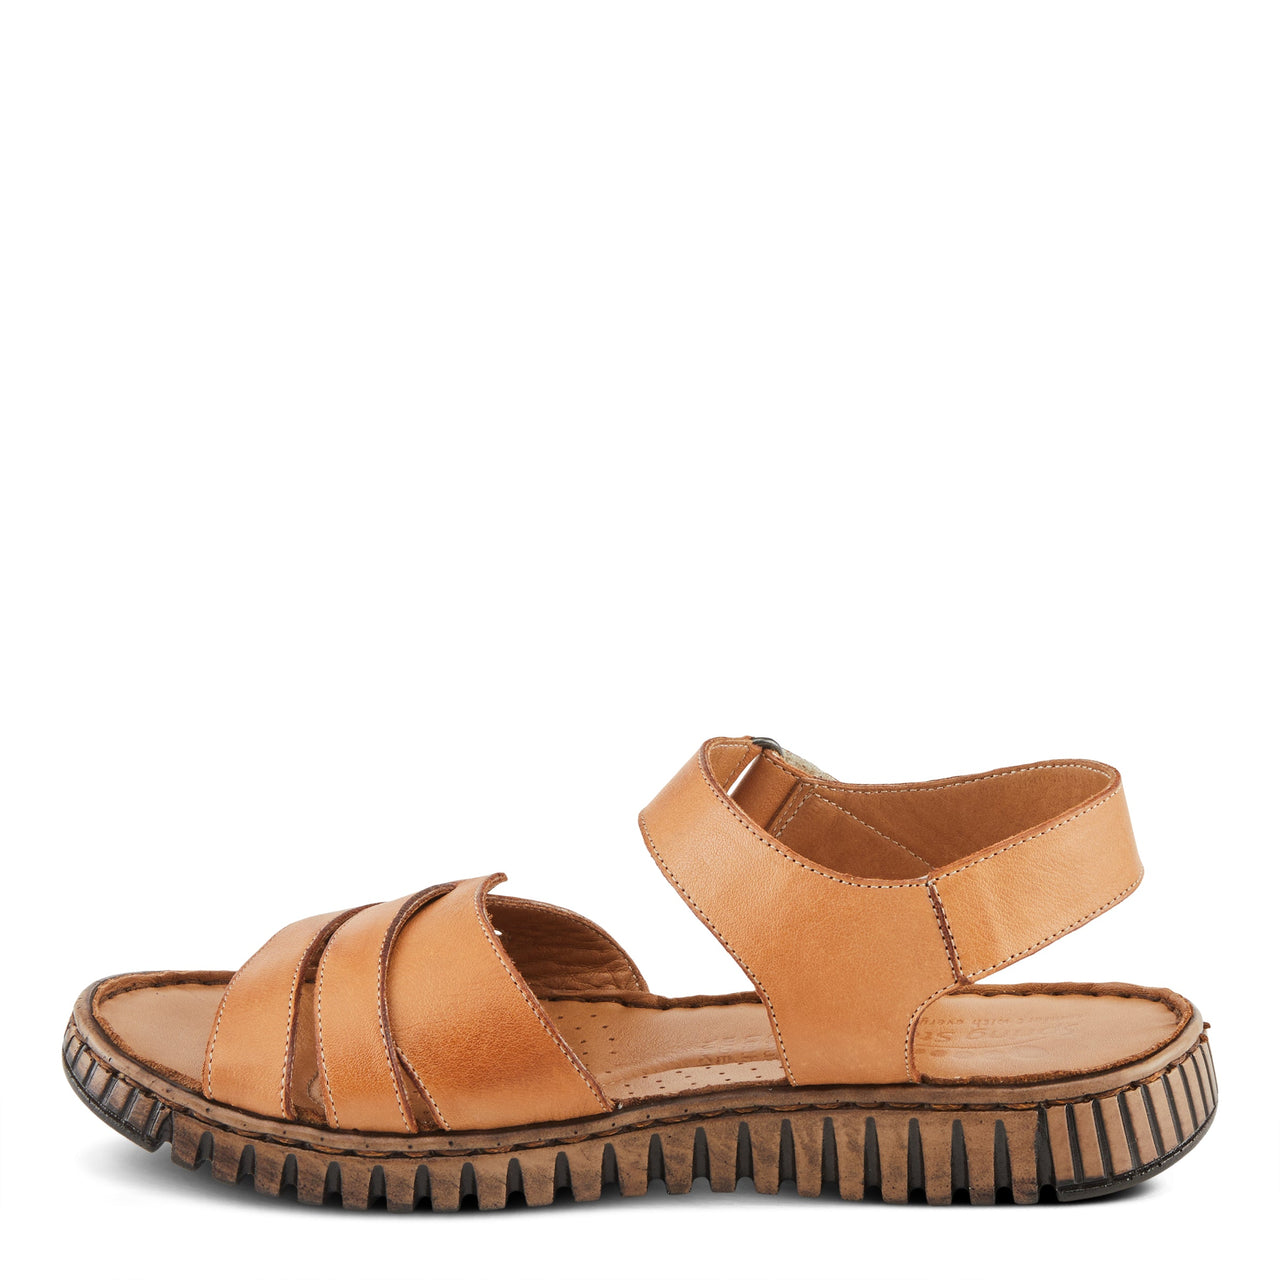 A pair of comfortable and stylish Spring Step Nochella Sandals in a beautiful taupe color, perfect for casual outings and summer adventures